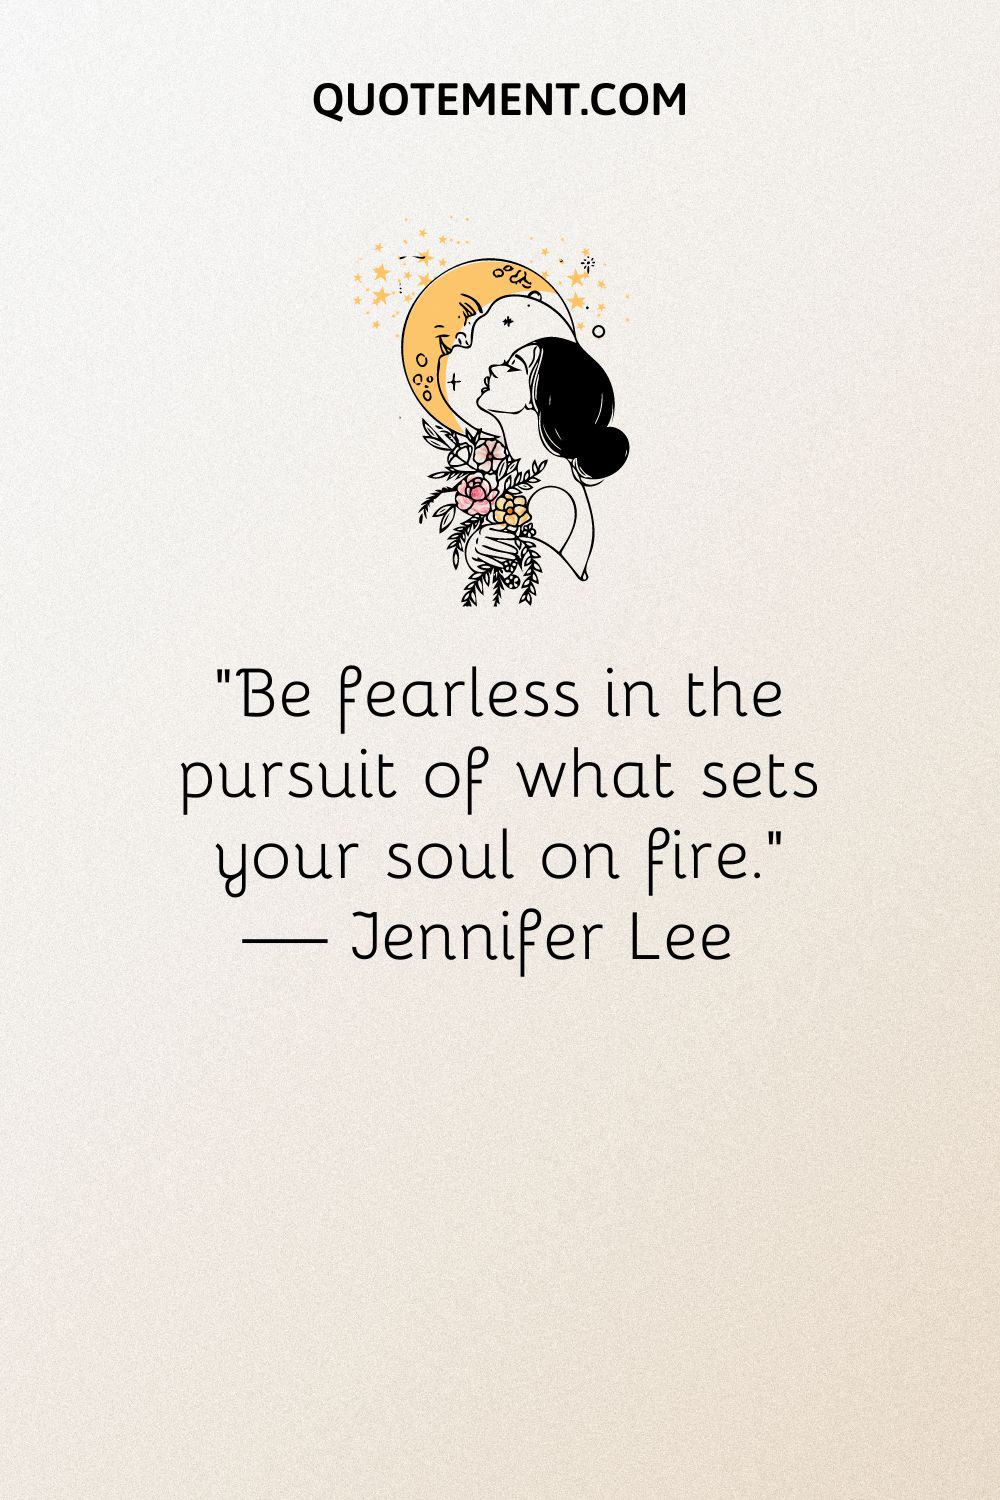 “Be fearless in the pursuit of what sets your soul on fire.” — Jennifer Lee